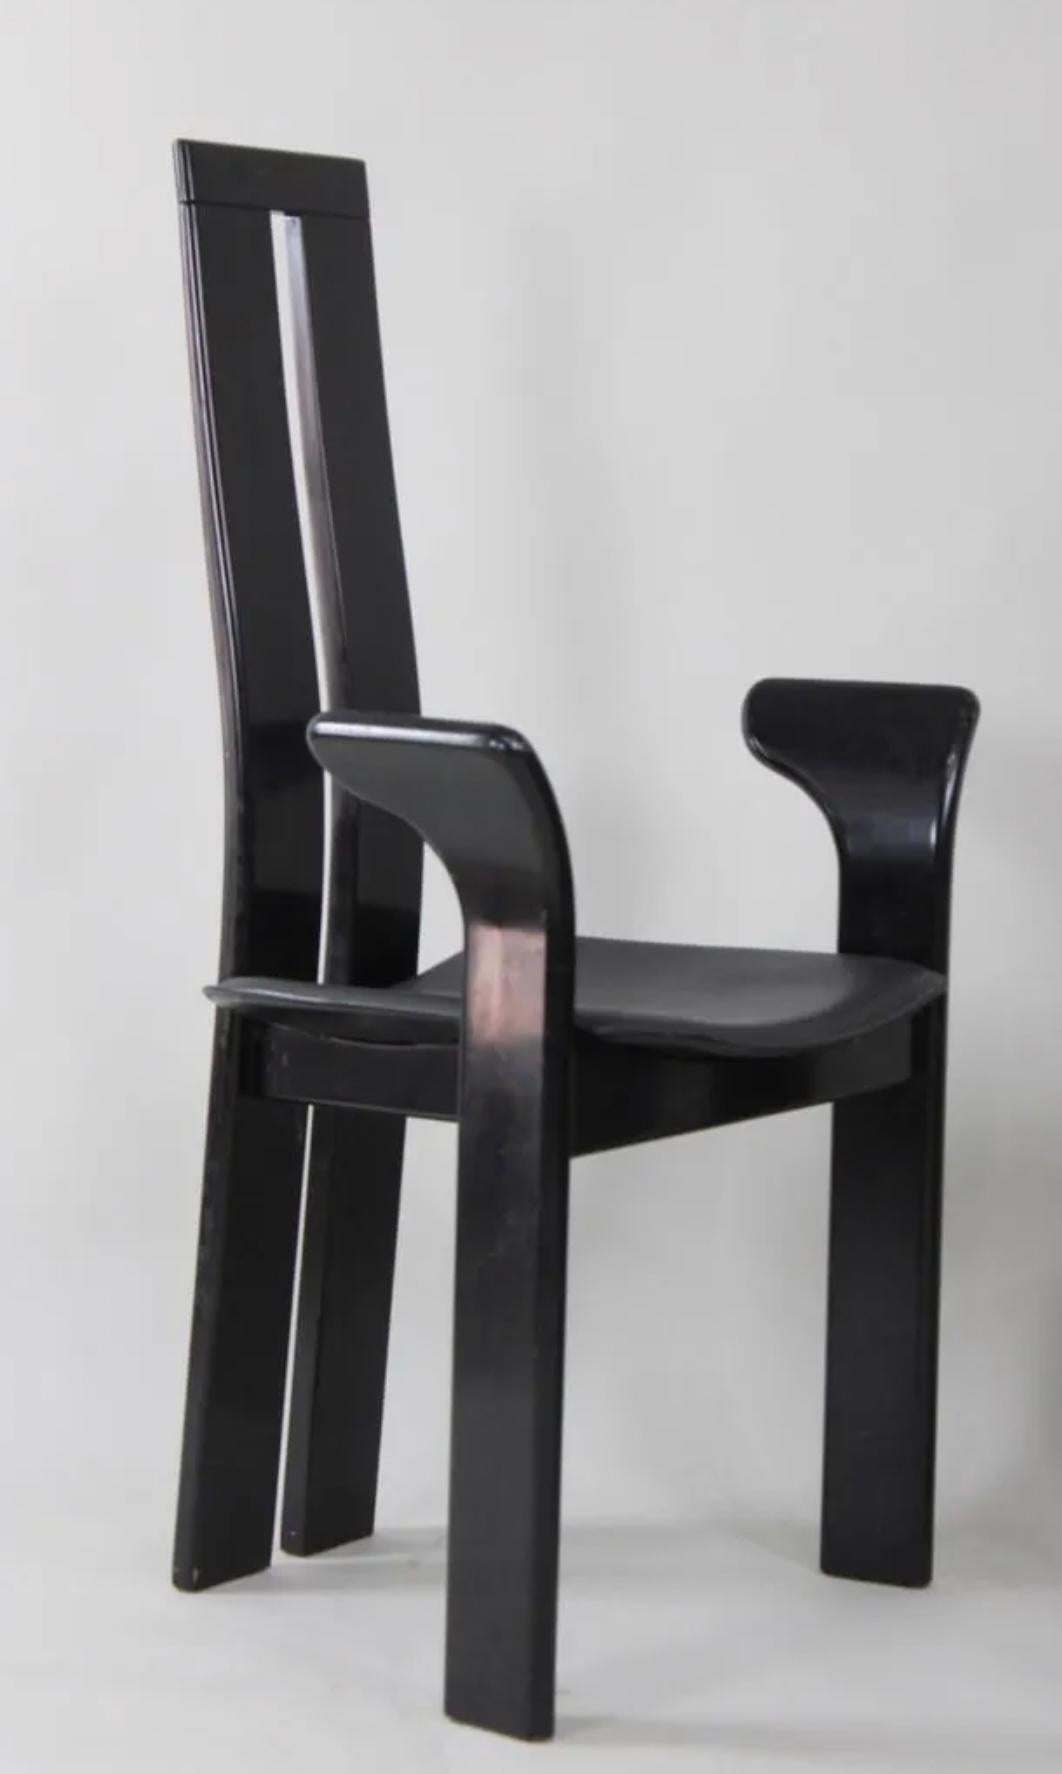 Amazing Set of 4 midcentury Post Modern Dining Chairs by Italian Designer Pietro Costantini. Very delicate Post Modern Designed Black Lacquer dining chairs with upholstered Seats. All chairs are ready for use. show normal wear from use. Made in